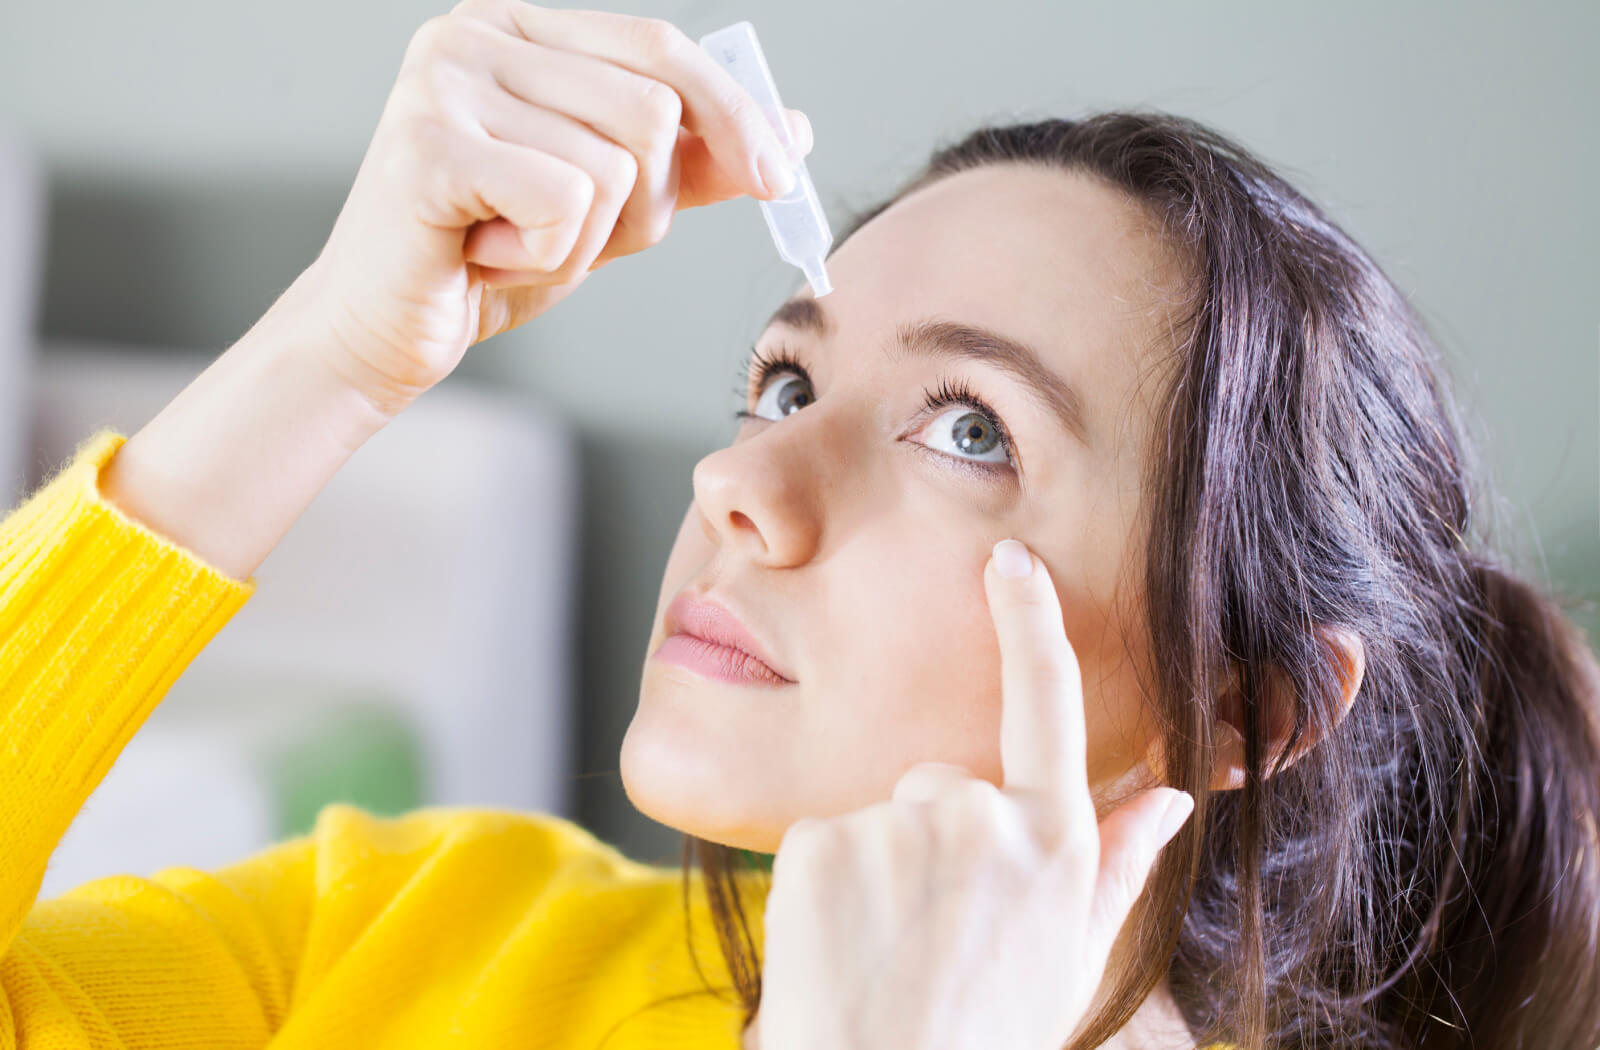 A woman holding a small bottle of eye drops in her right hand and putting them on her left eye while she uses her left index finger to pull her eyelid down.